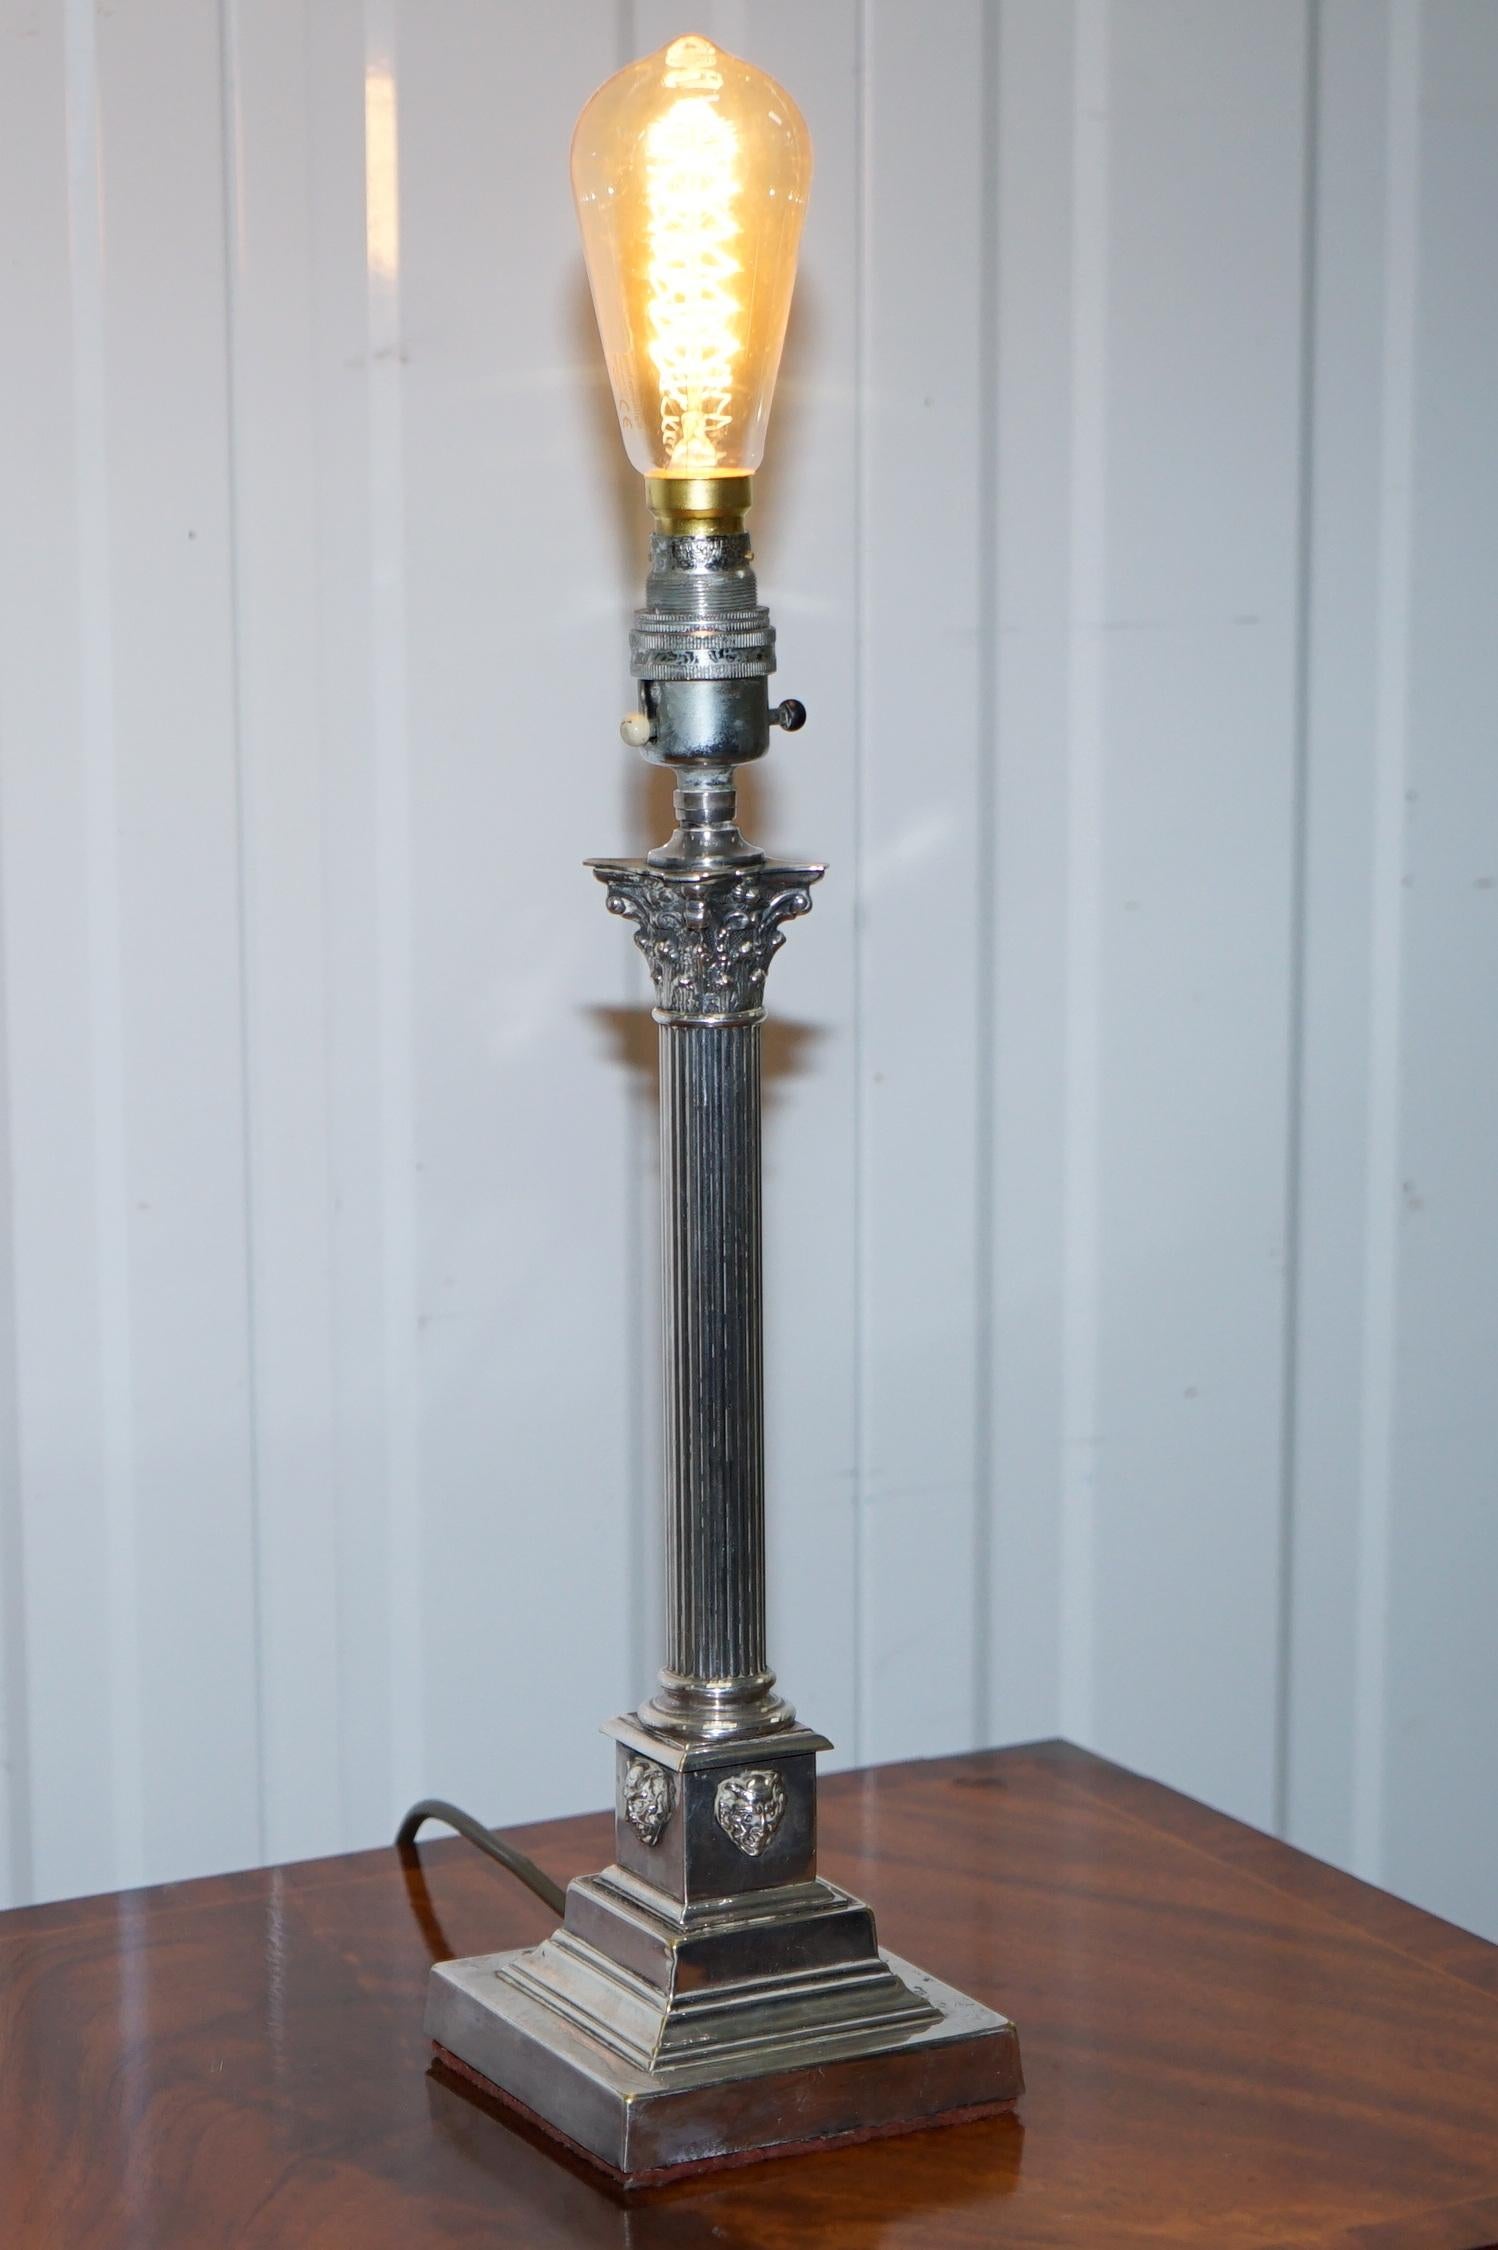 We are delighted to this stunning vintage silver plated Corinthian pillared Nelson's column table lamp

A very well made and beautifully cast lamp, the silver plating is of a very high standard, I’ve seen a few table lamps of this quality, they